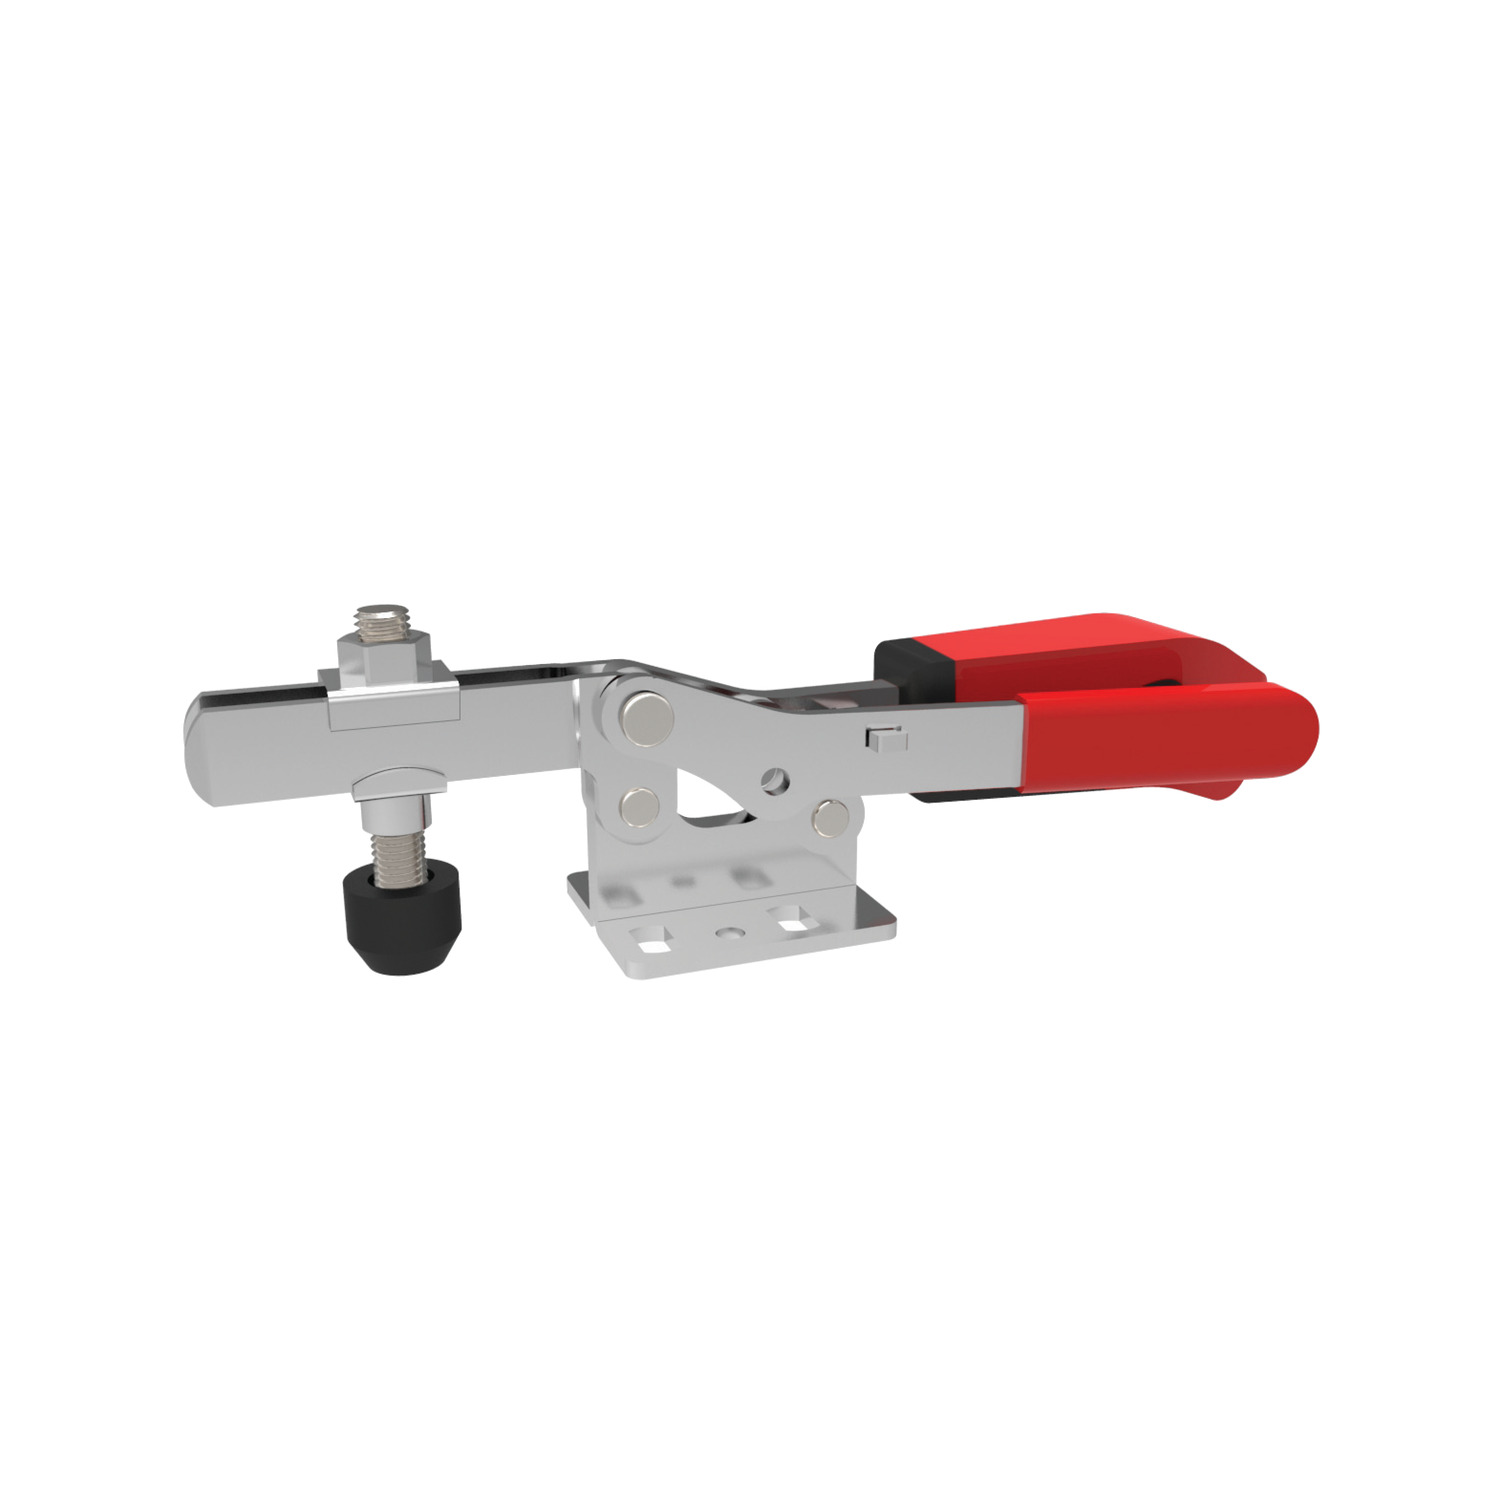 Horizontal Acting Toggle Clamps The safety lever on the horizontal acting toggle clamp holds the clamping arm in either a clamped or open position, this prevents opening under vibration.